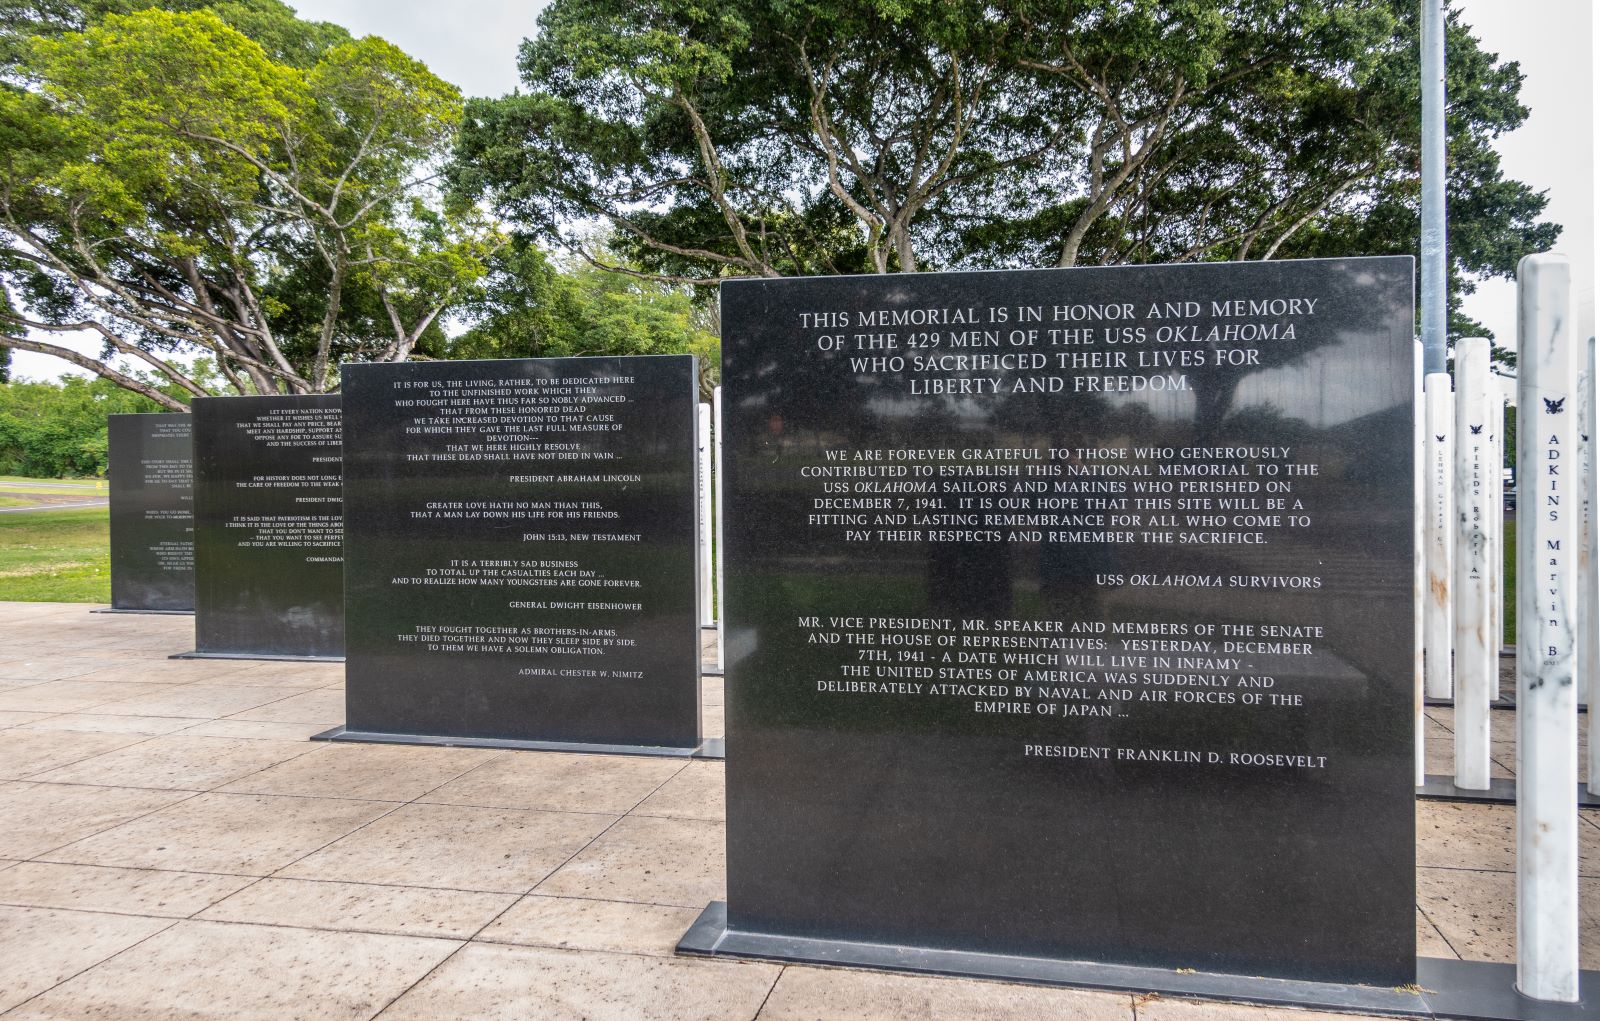 Image credit: Shutterstock / Claudine Van Massenhove <p>Dedicated to the 429 sailors who died when their battleship capsized, this memorial features black granite walls and marble standards representing each sailor.</p>